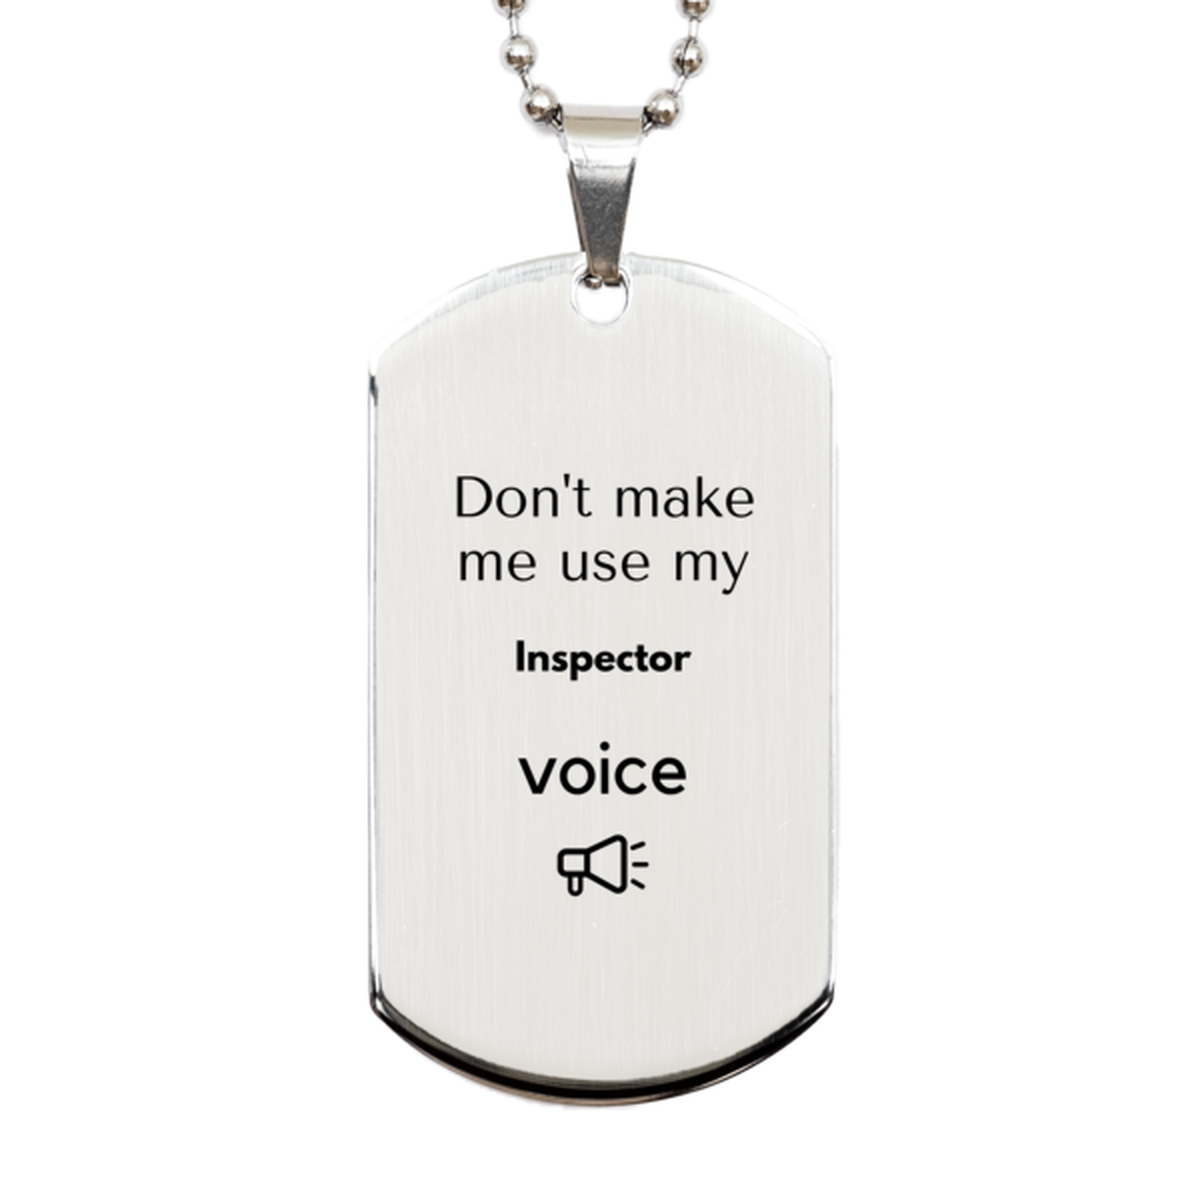 Don't make me use my Inspector voice, Sarcasm Inspector Gifts, Christmas Inspector Silver Dog Tag Birthday Unique Gifts For Inspector Coworkers, Men, Women, Colleague, Friends